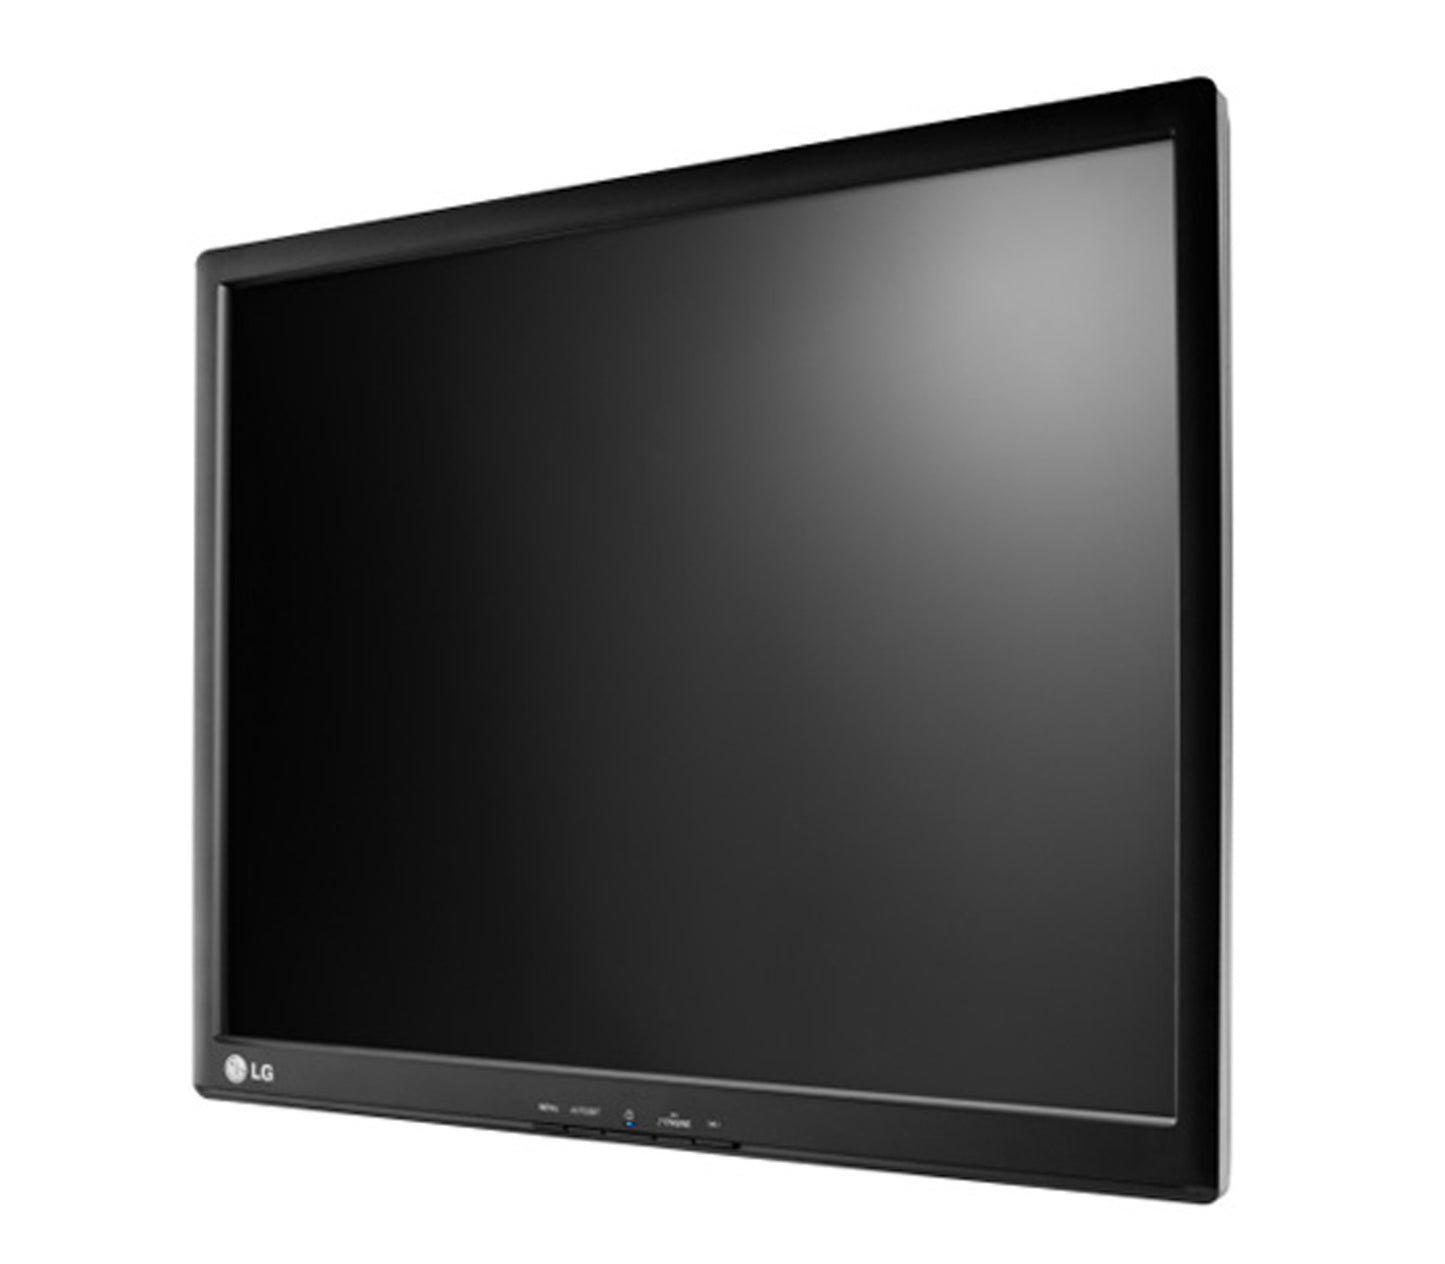 LG MONITOR LG LCD 17IN TOUCH SCR MNTR TN 5:4 12801024 VGA